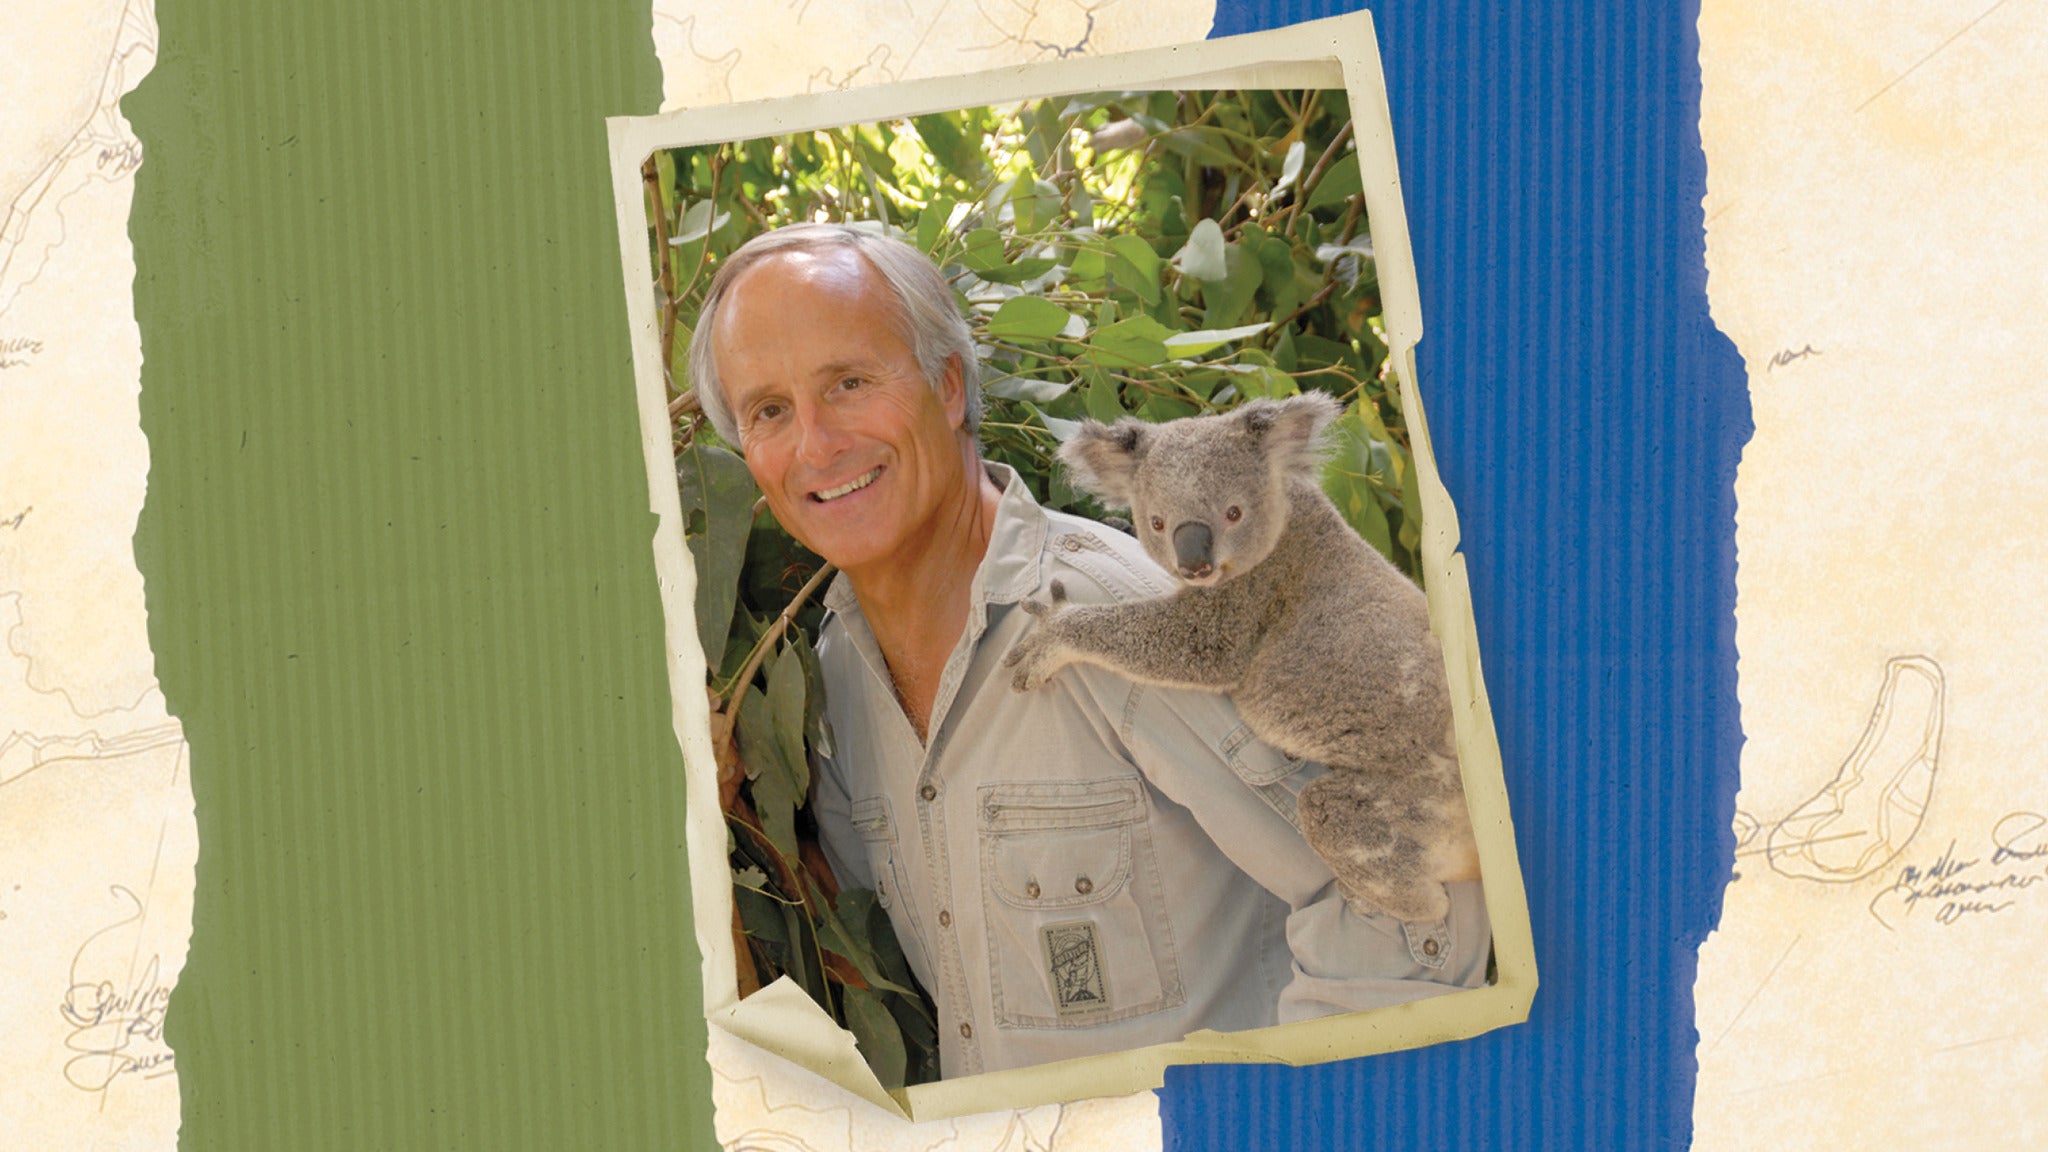 Jack Hanna's Into The Wild Live! in Englewood promo photo for Member presale offer code